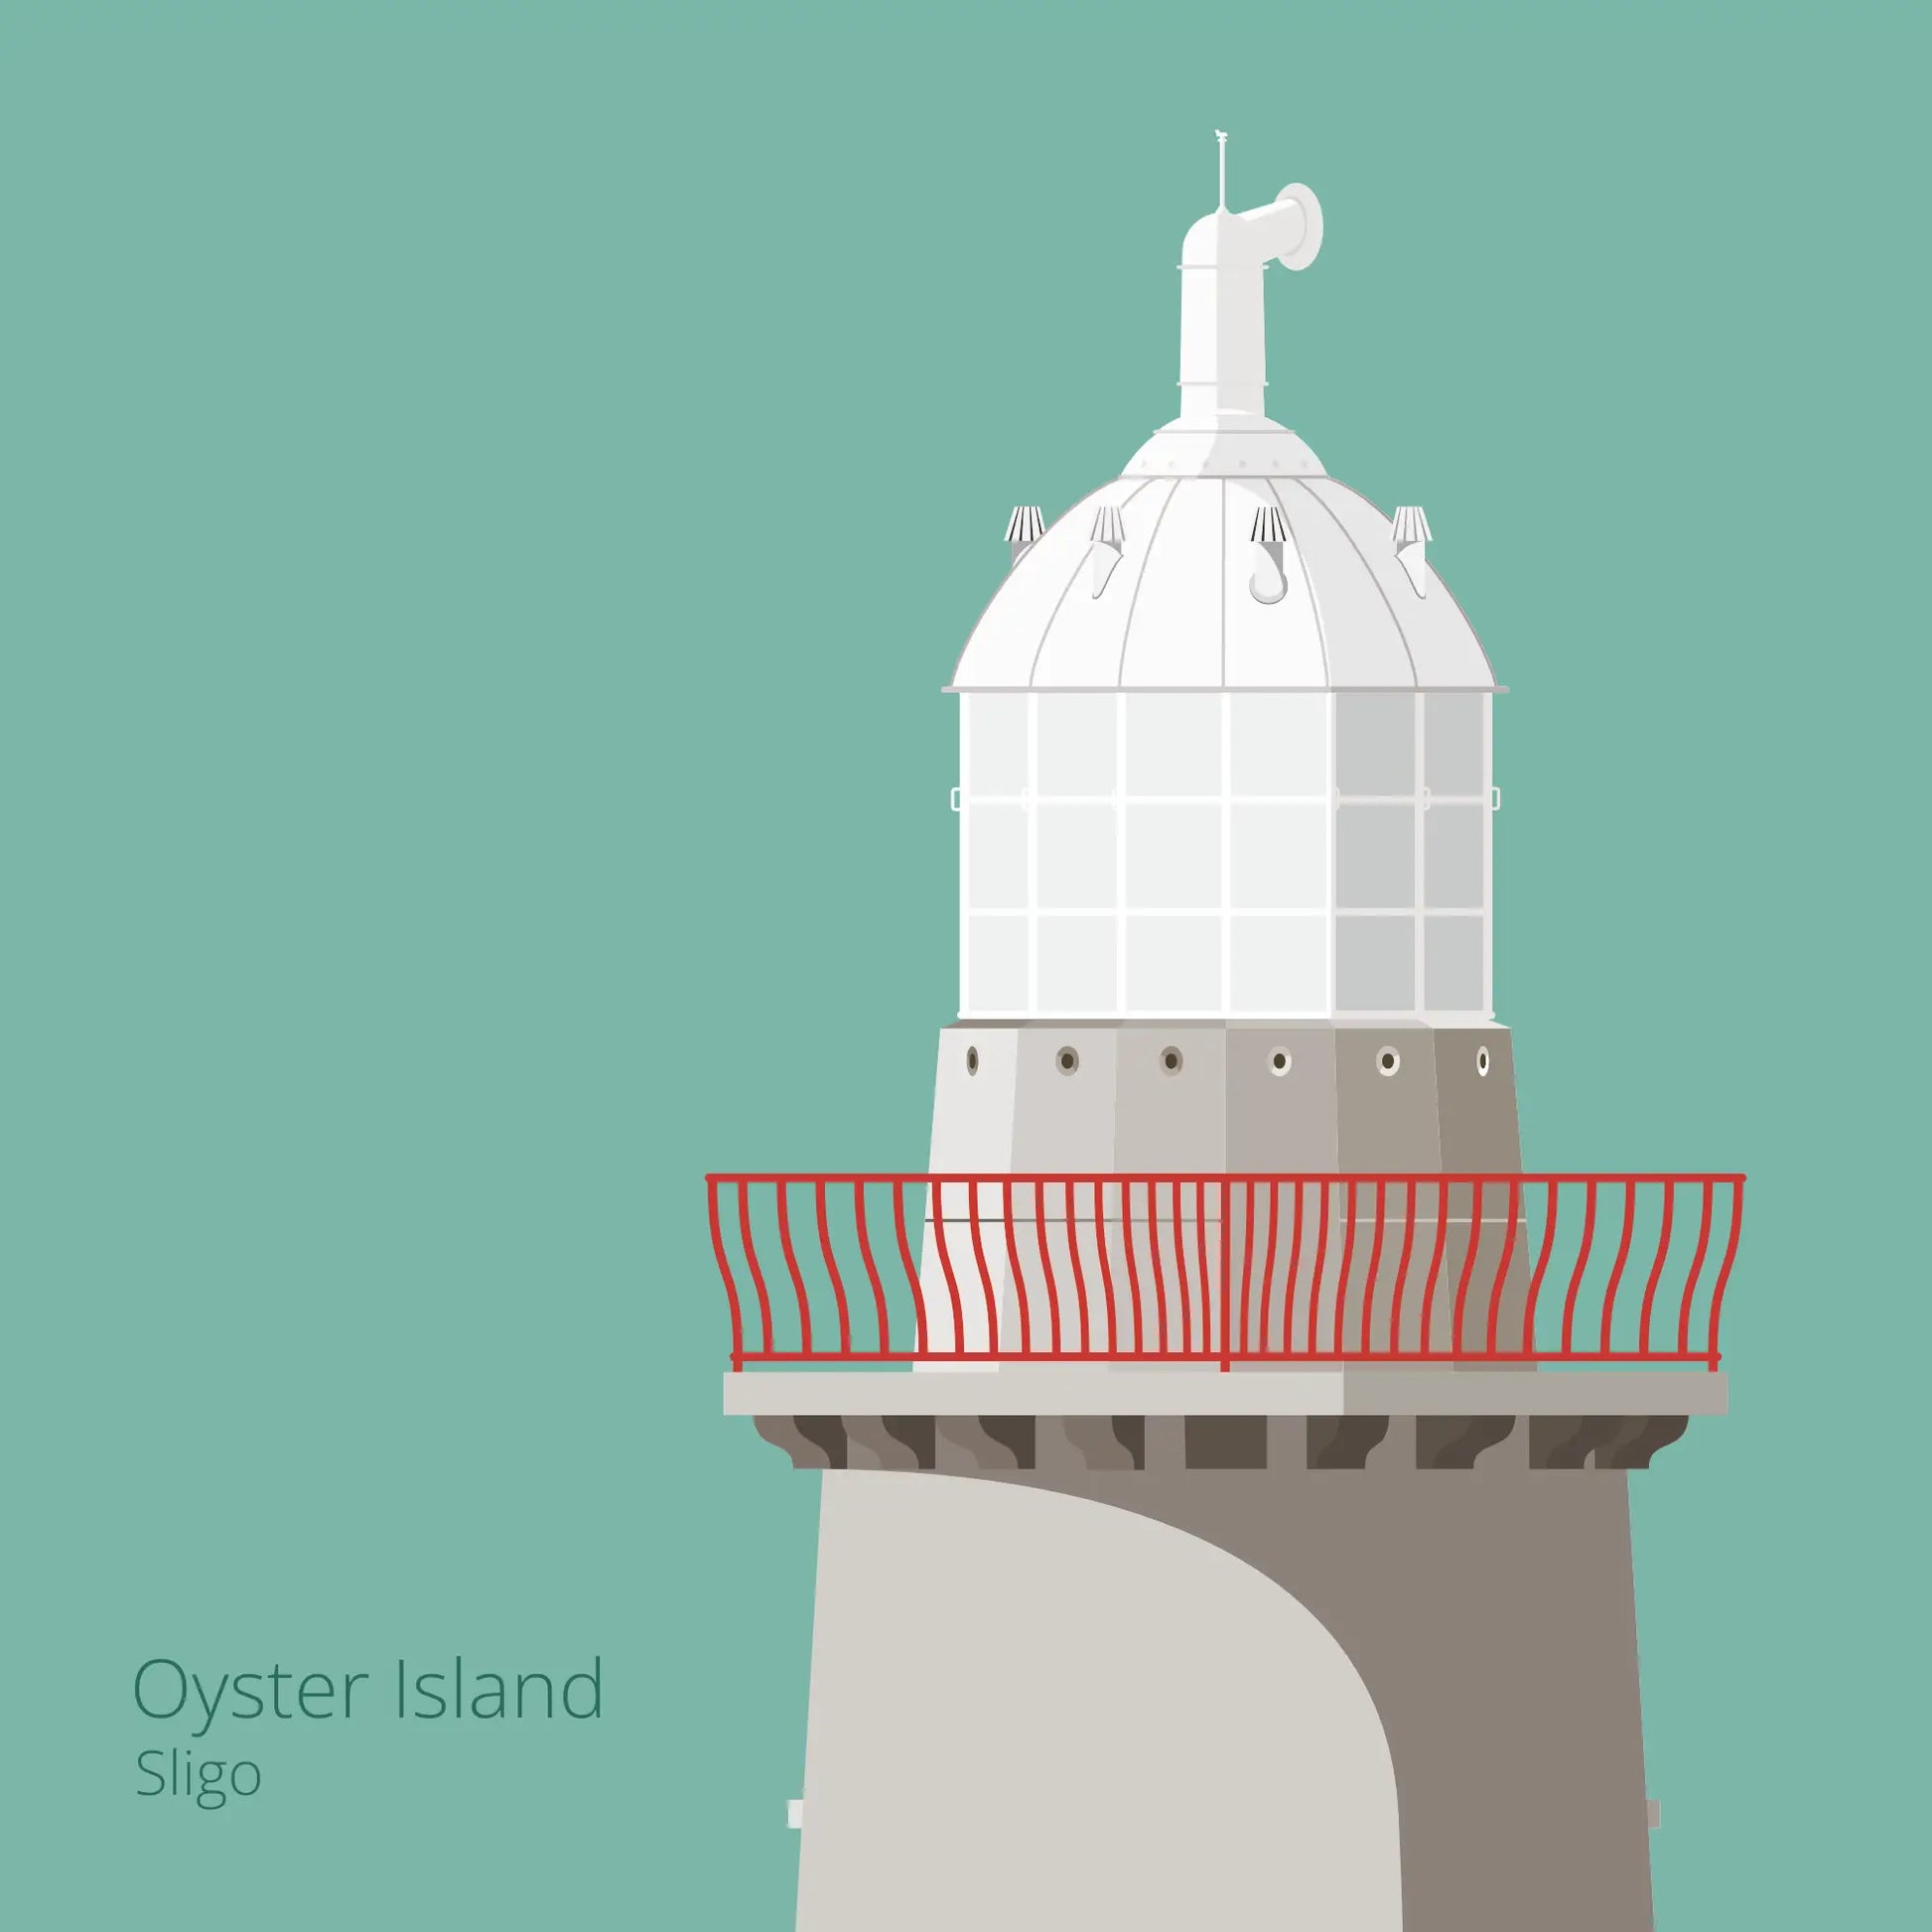 Illustration of Oyster Island lighthouse on an ocean green background